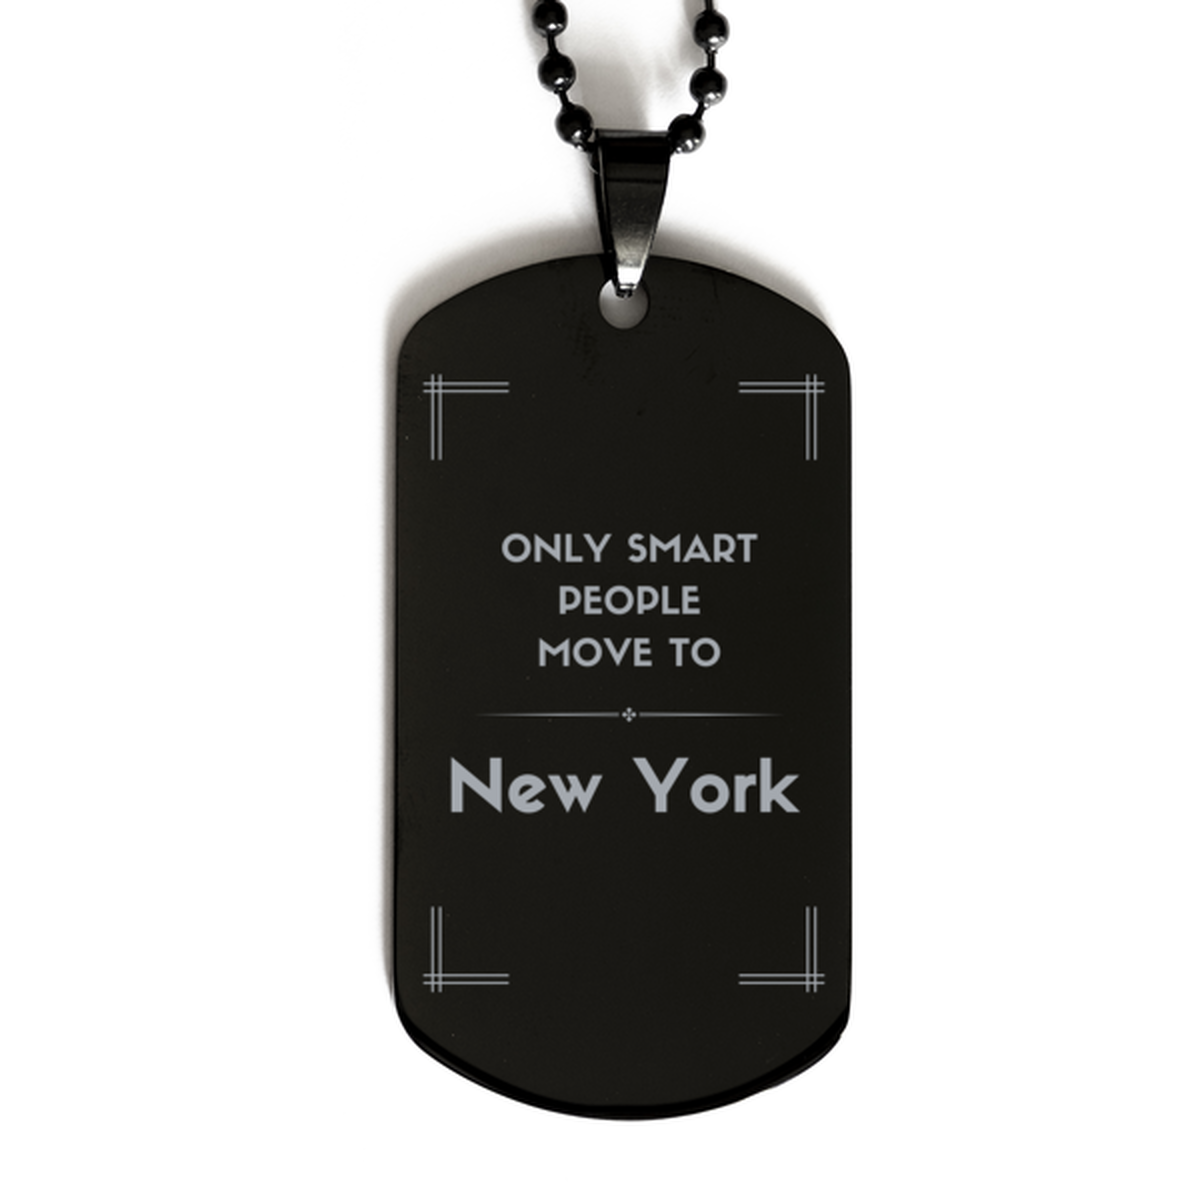 Only smart people move to New York Black Dog Tag, Gag Gifts For New York, Move to New York Gifts for Friends Coworker Funny Saying Quote